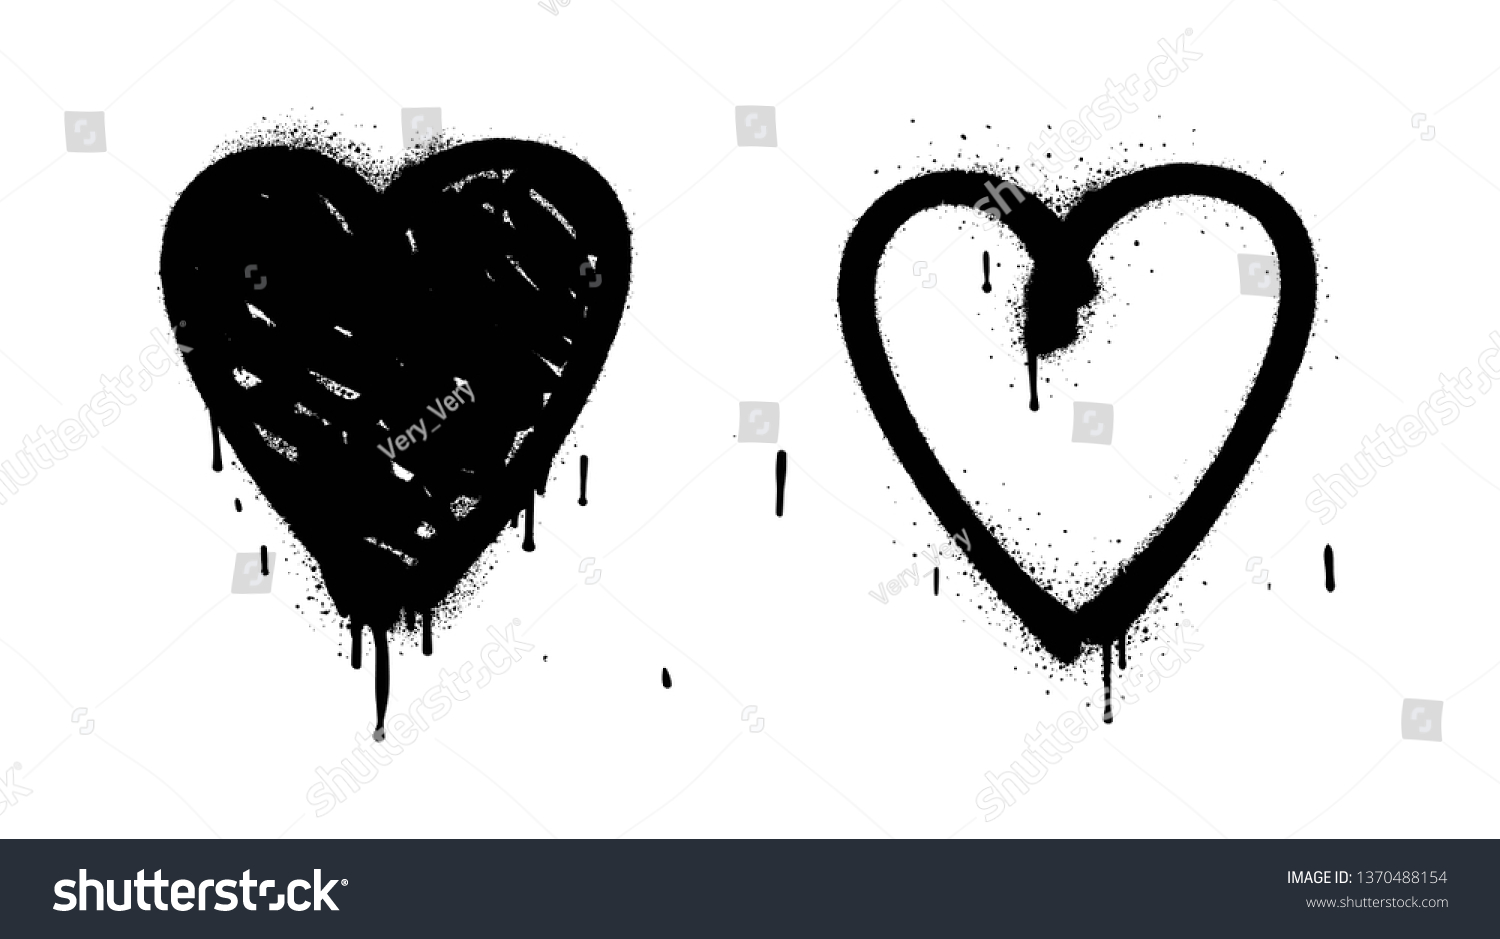 SVG of Spray Paint Heart Elements isolated on White Background. Vector Symbol of Love for Happy Women's, Mother's, Valentine's Day, Birthday greeting card.  Street style.  svg